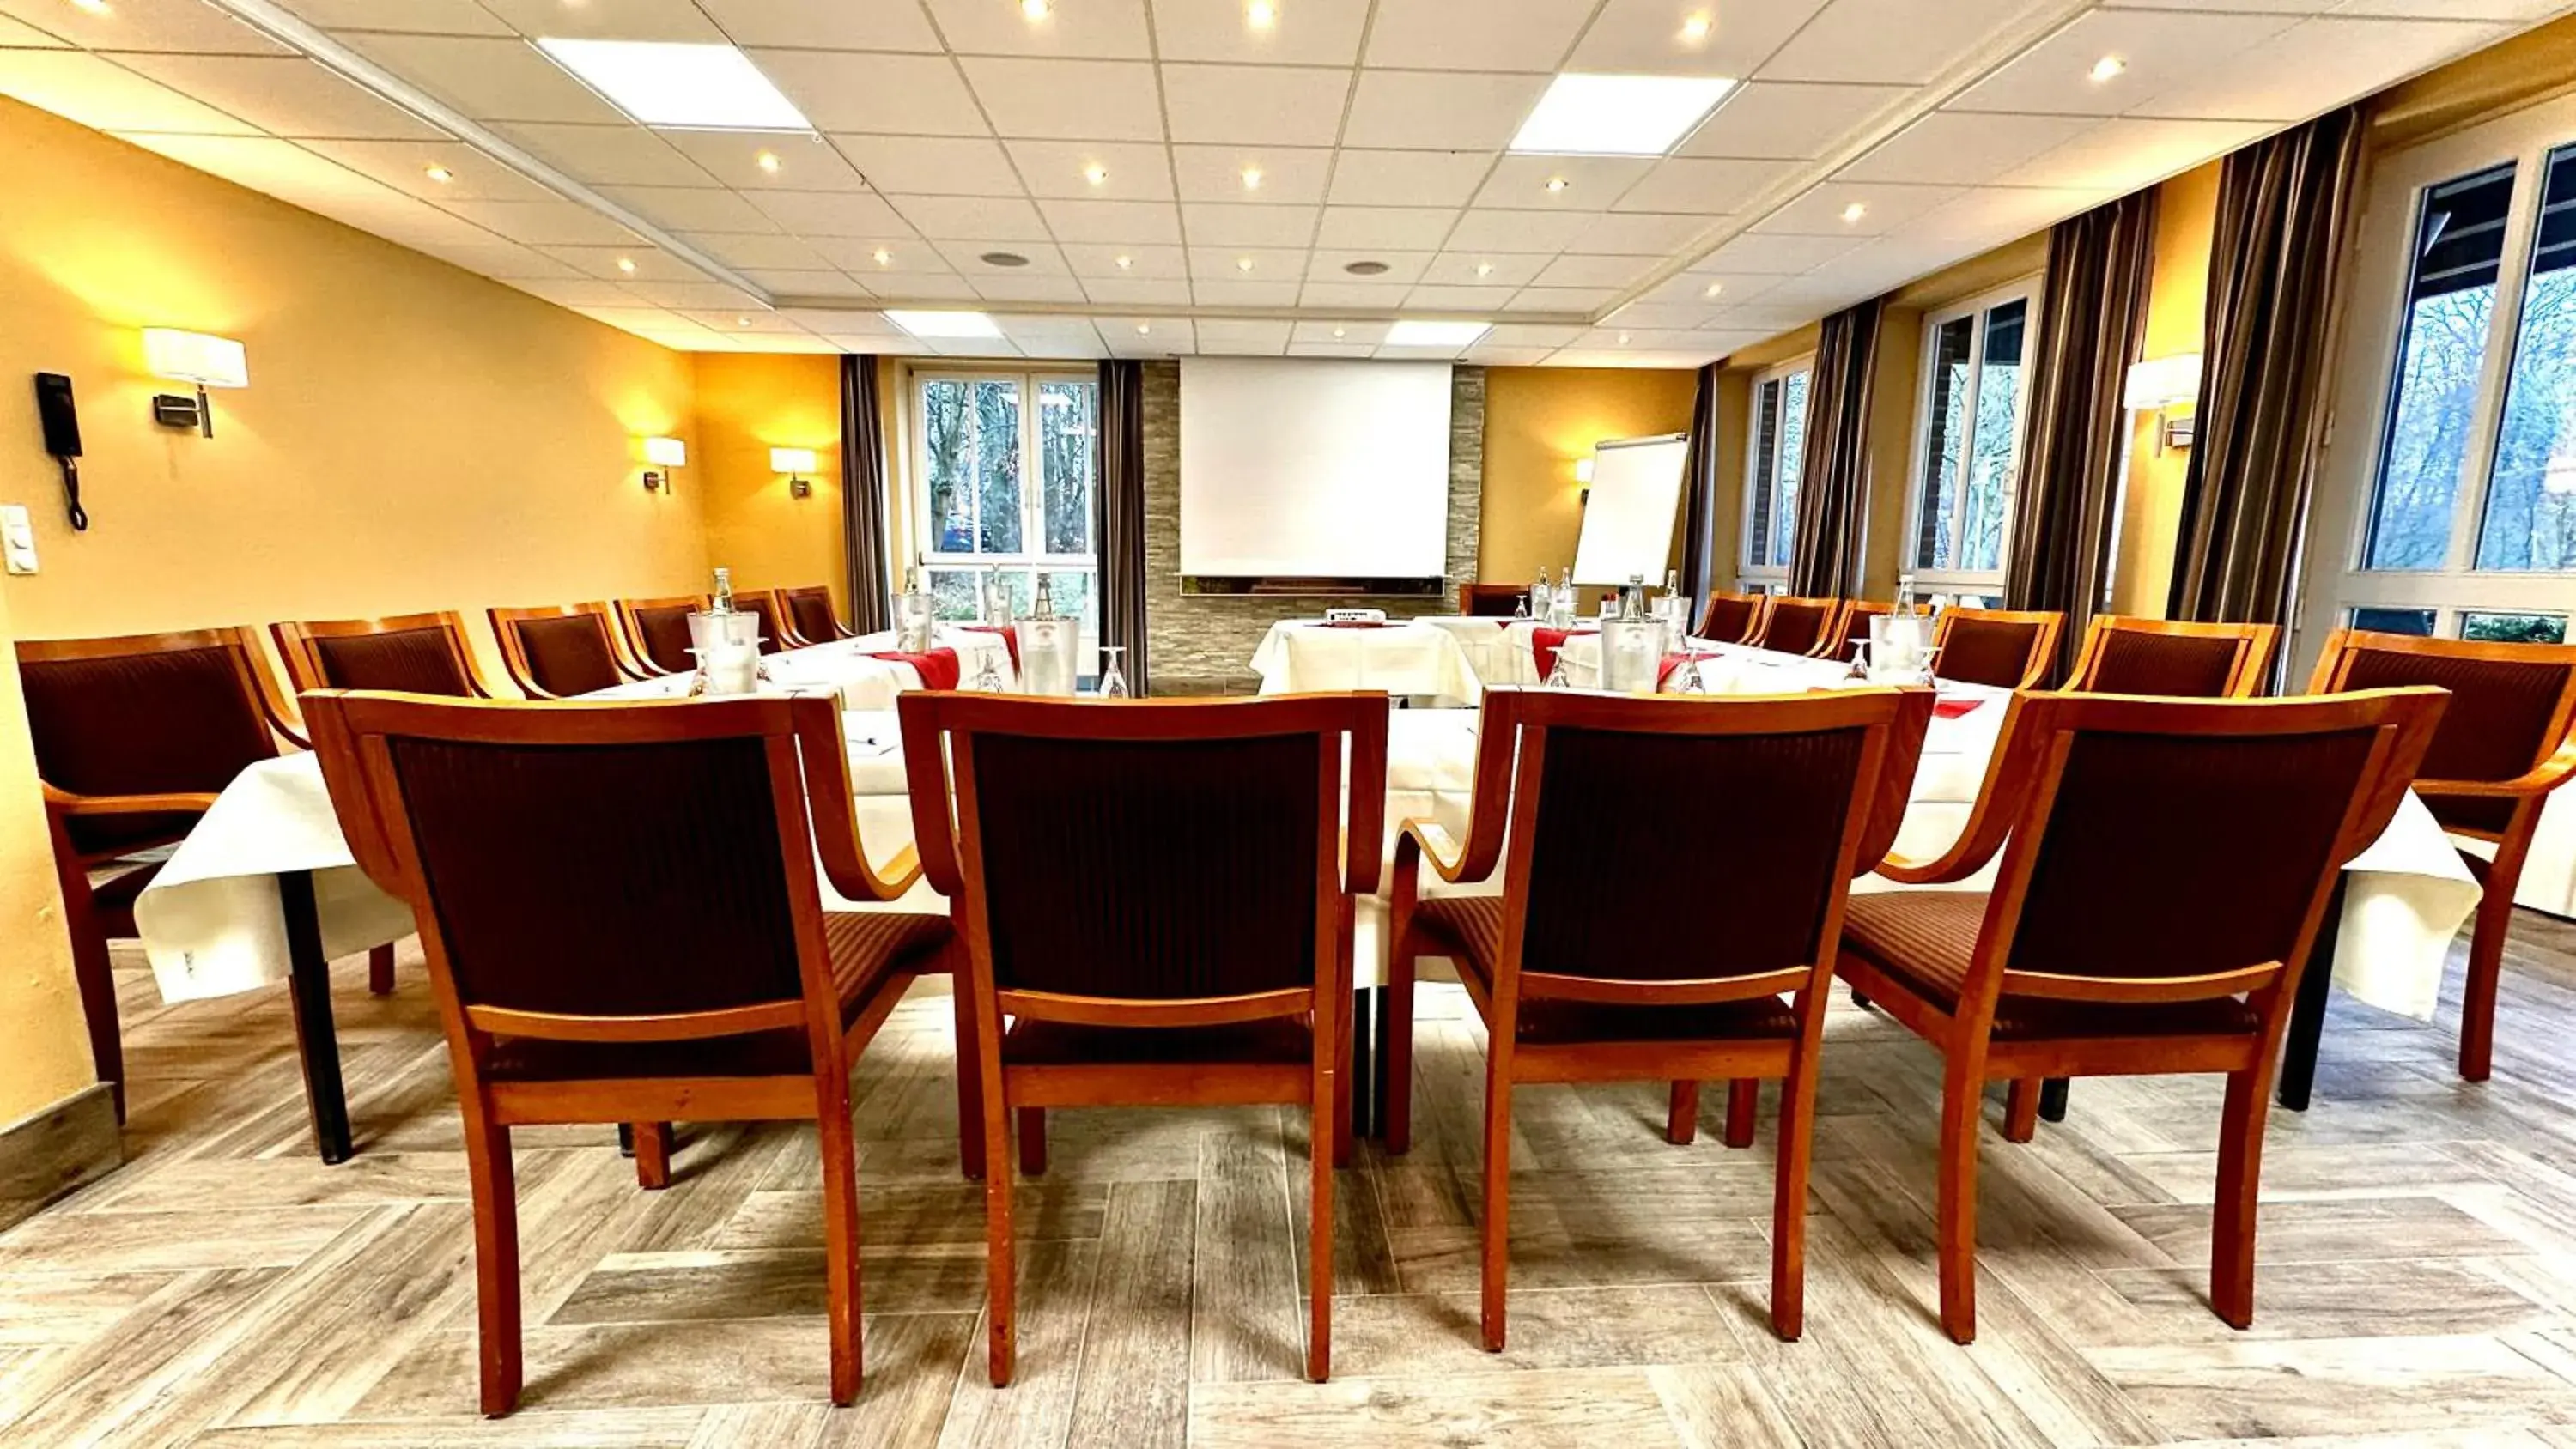 Meeting/conference room in Park Hotel Fasanerie Neustrelitz